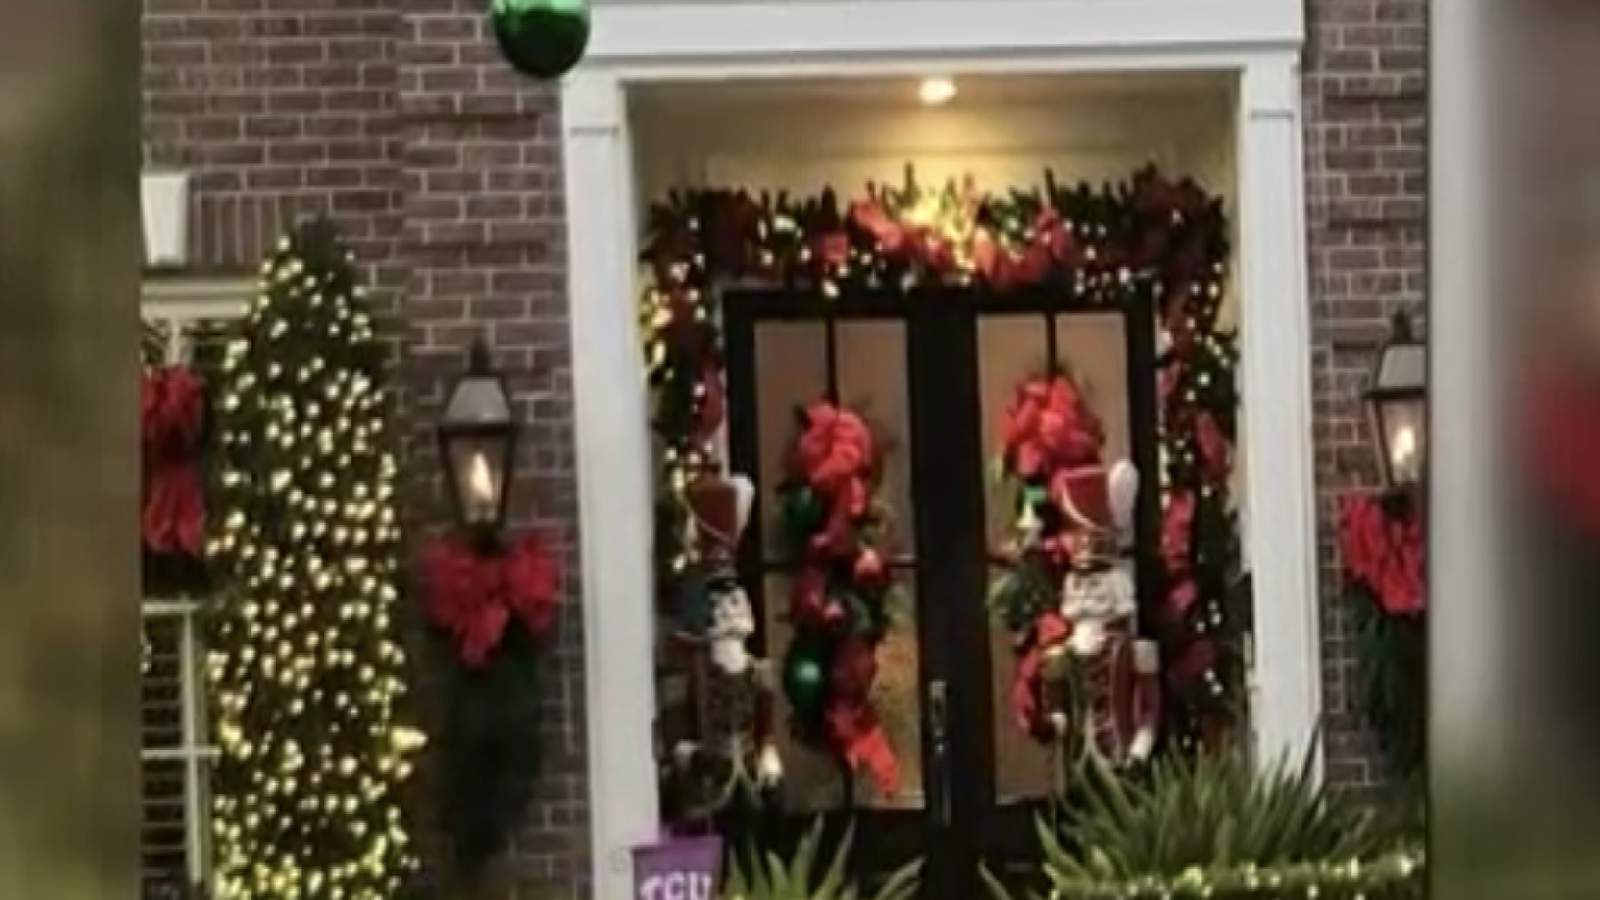 ‘Grinch’ steals life-sized Christmas decorations from home in the Galleria area